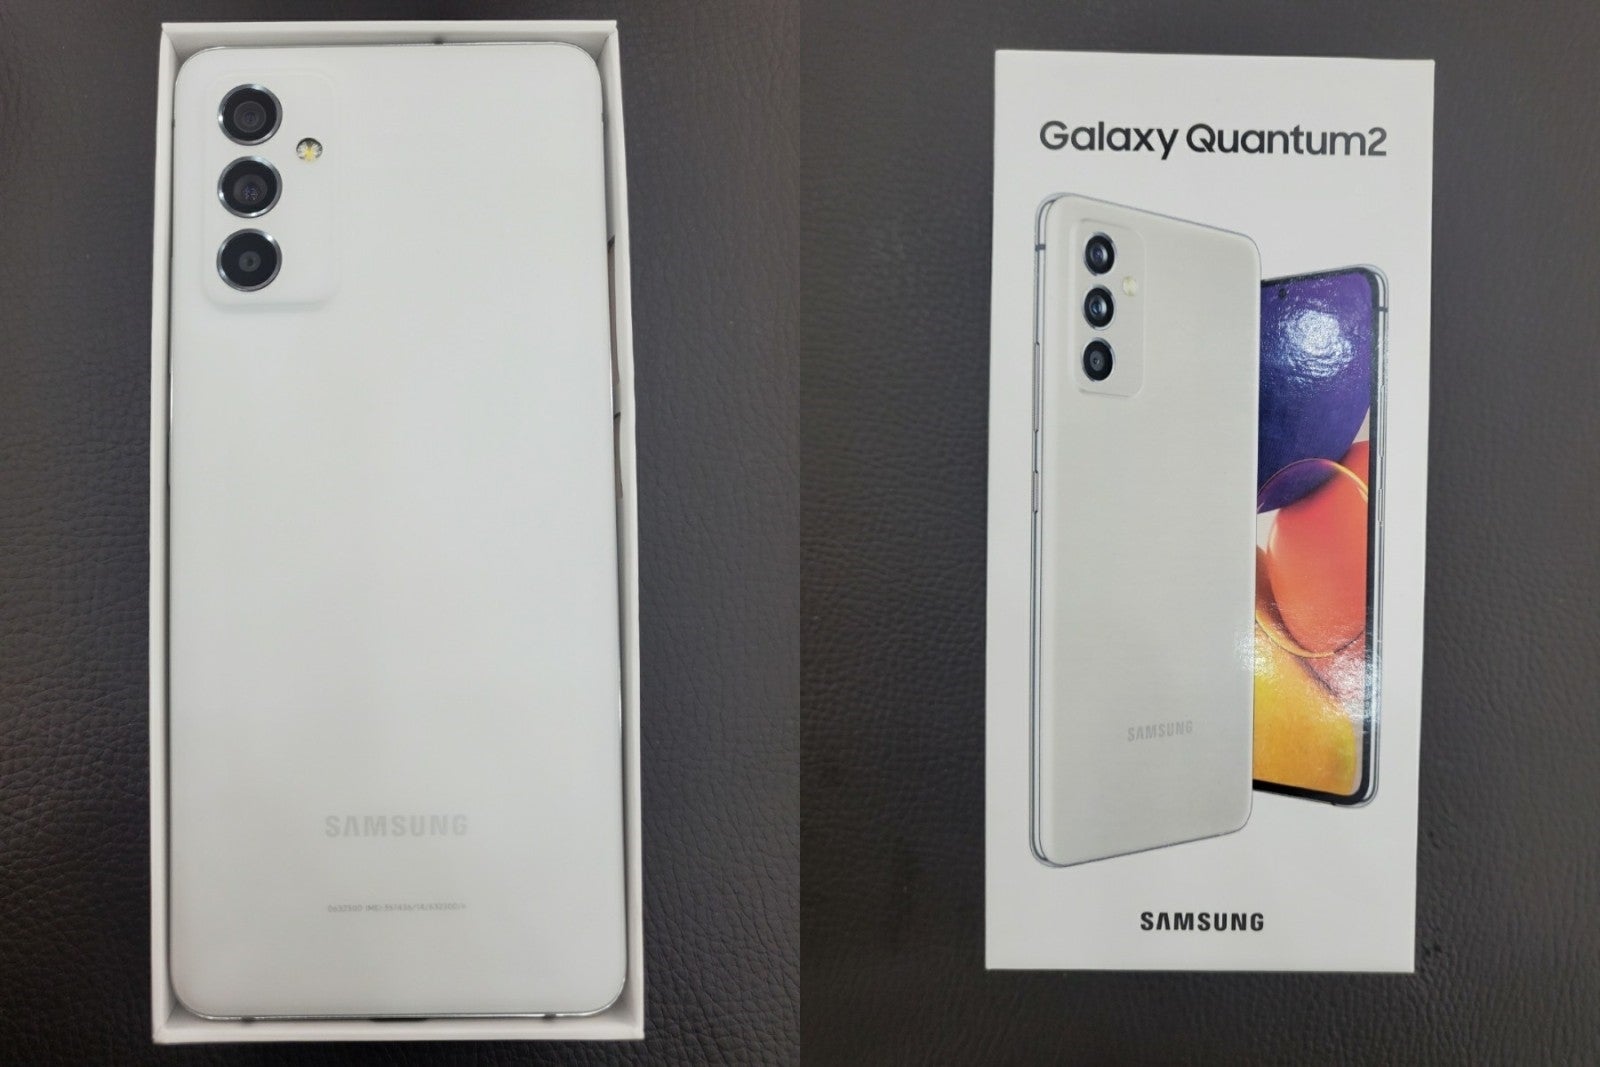 Samsung Galaxy A82 appears in its full glory weeks before its release date